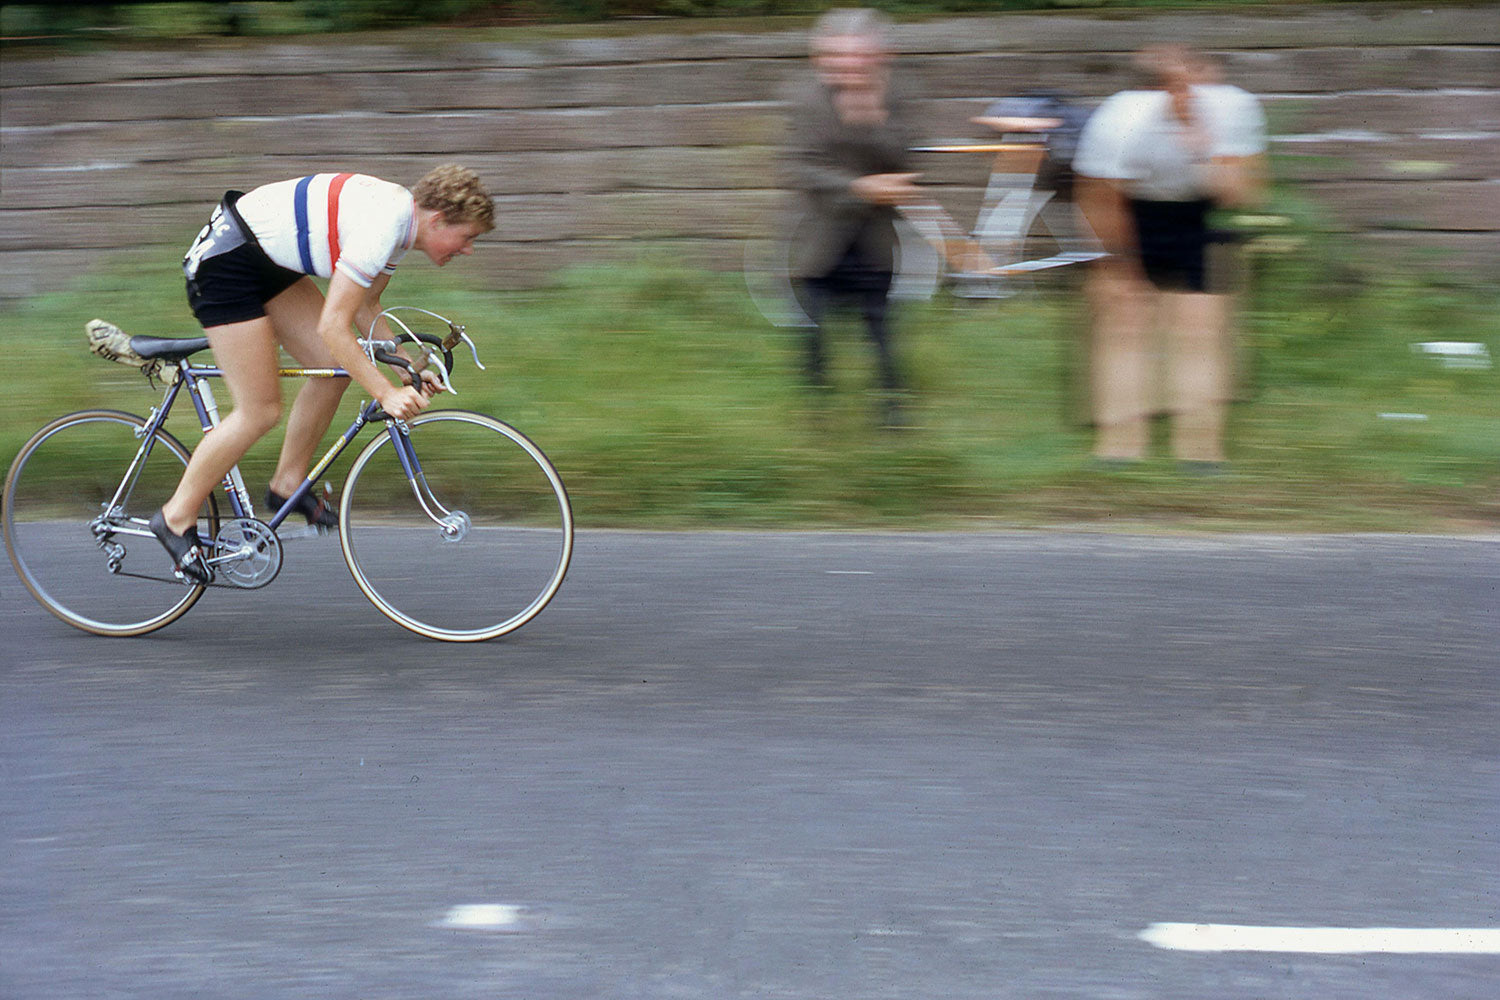 Beryl Burton attacks during the Pennine Road Race, 1967.  Photo: Allan Cash picture library/Alamy Stock.